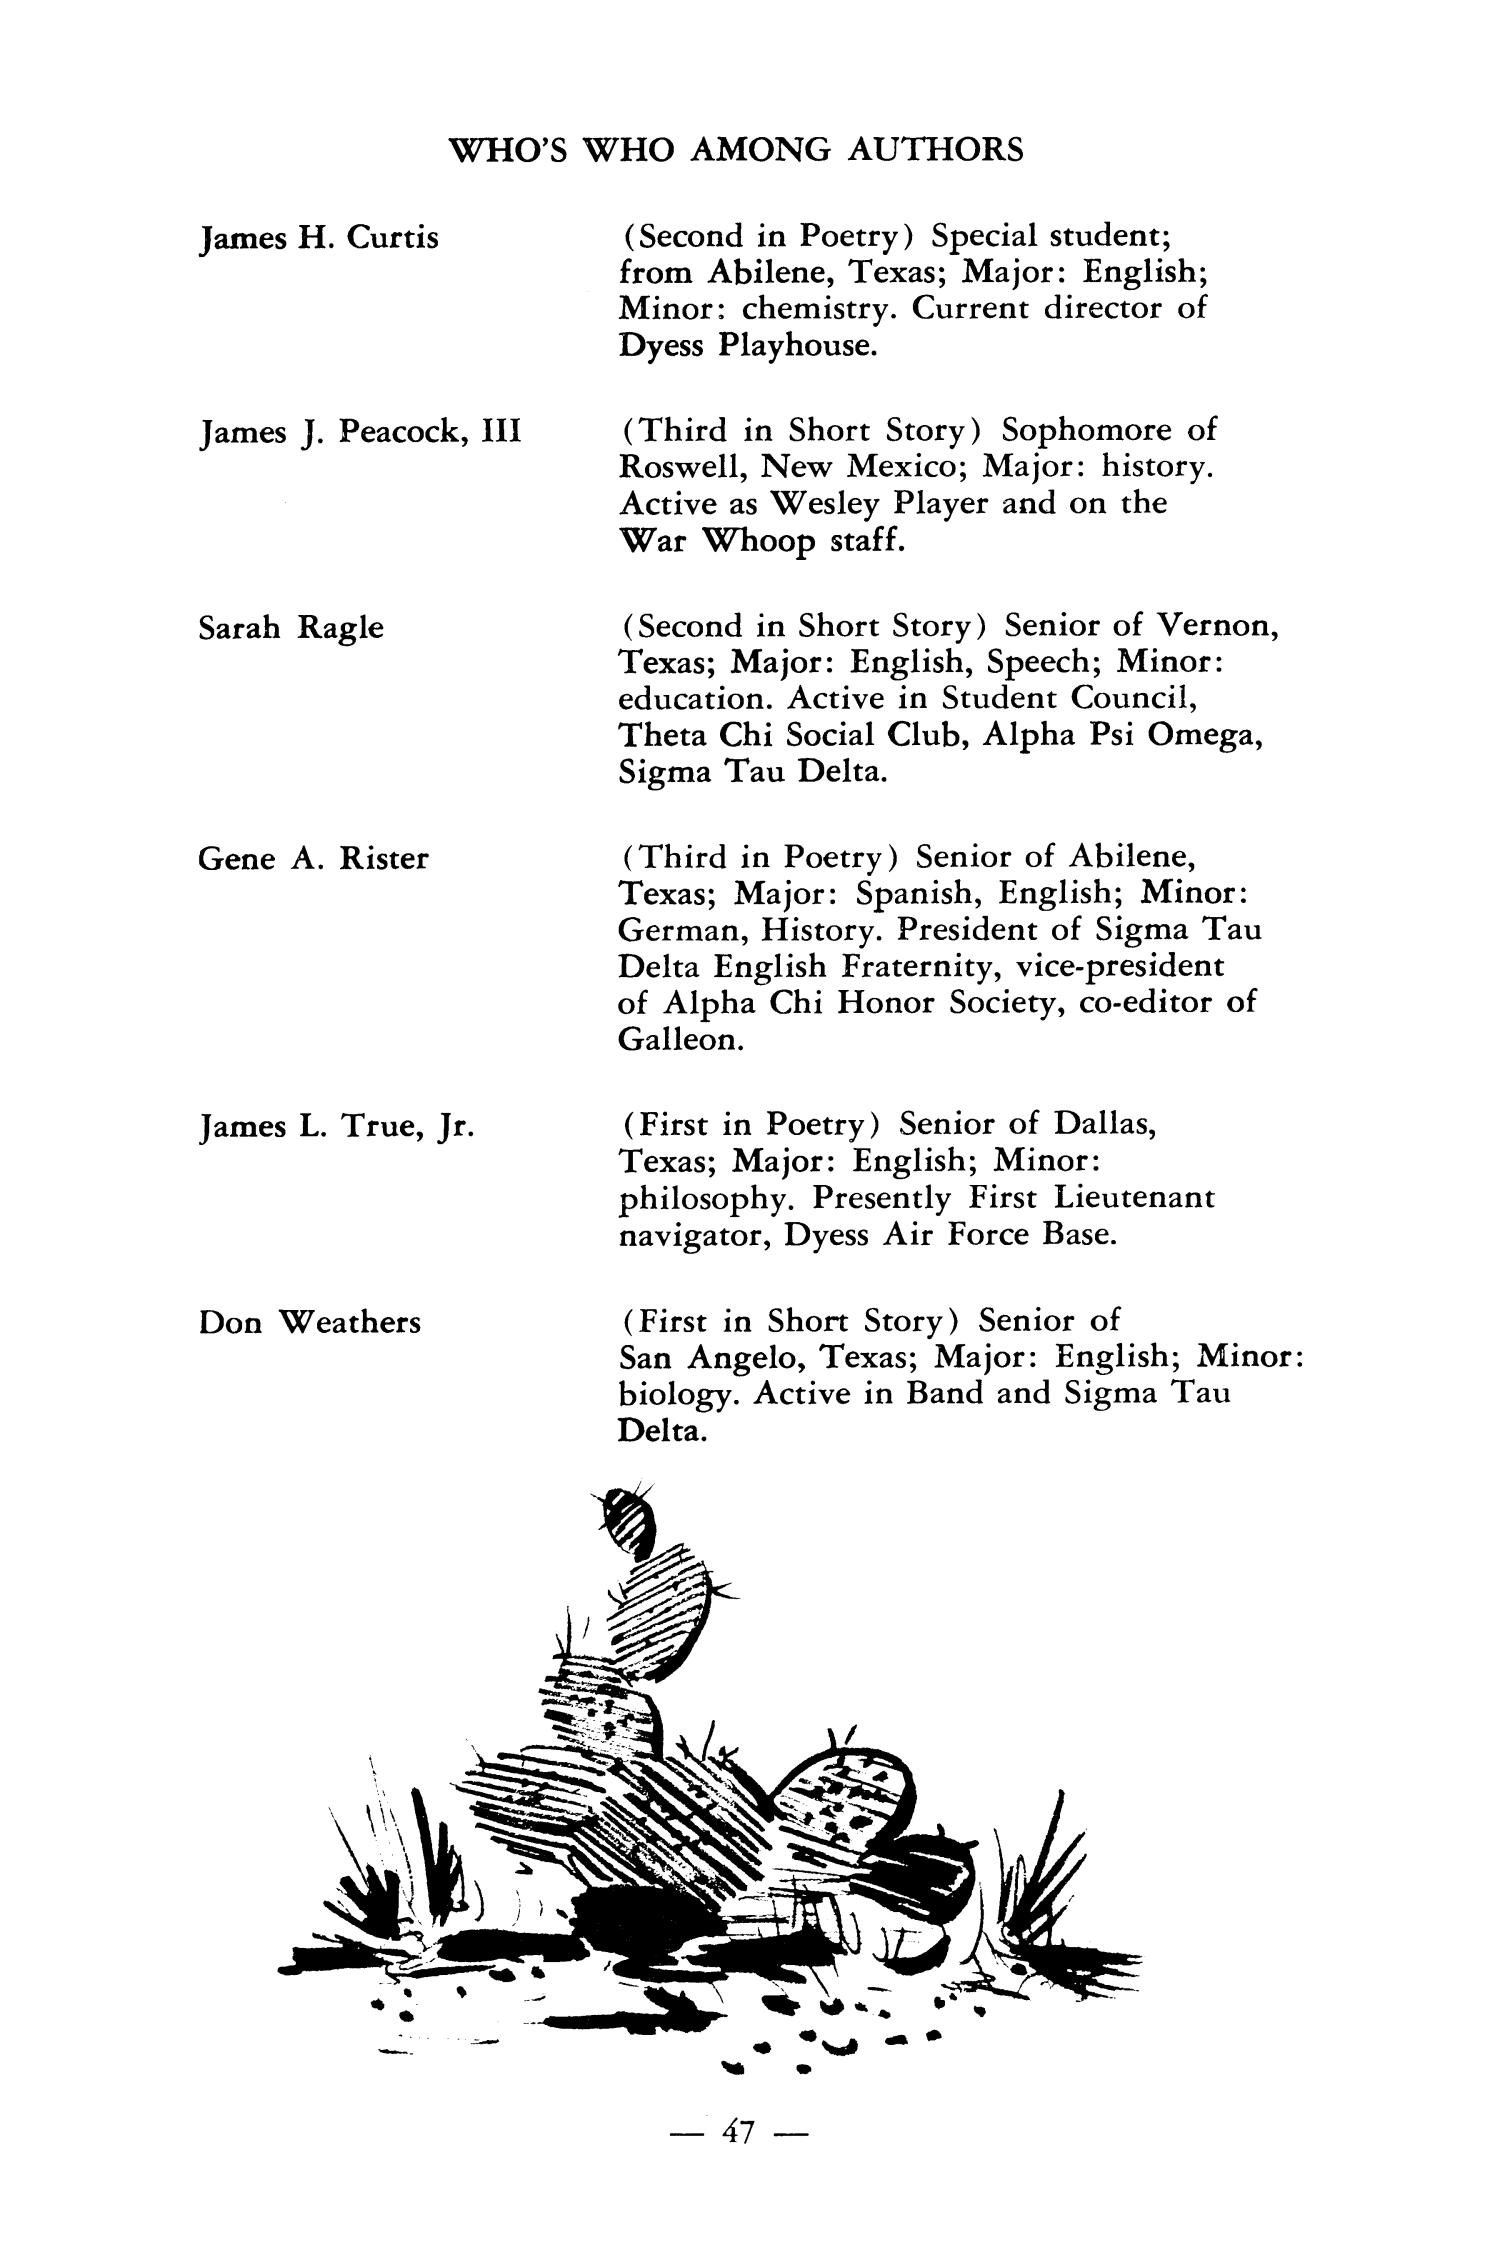 The Galleon, Volume 41, Number 1, Fall 1964
                                                
                                                    47
                                                